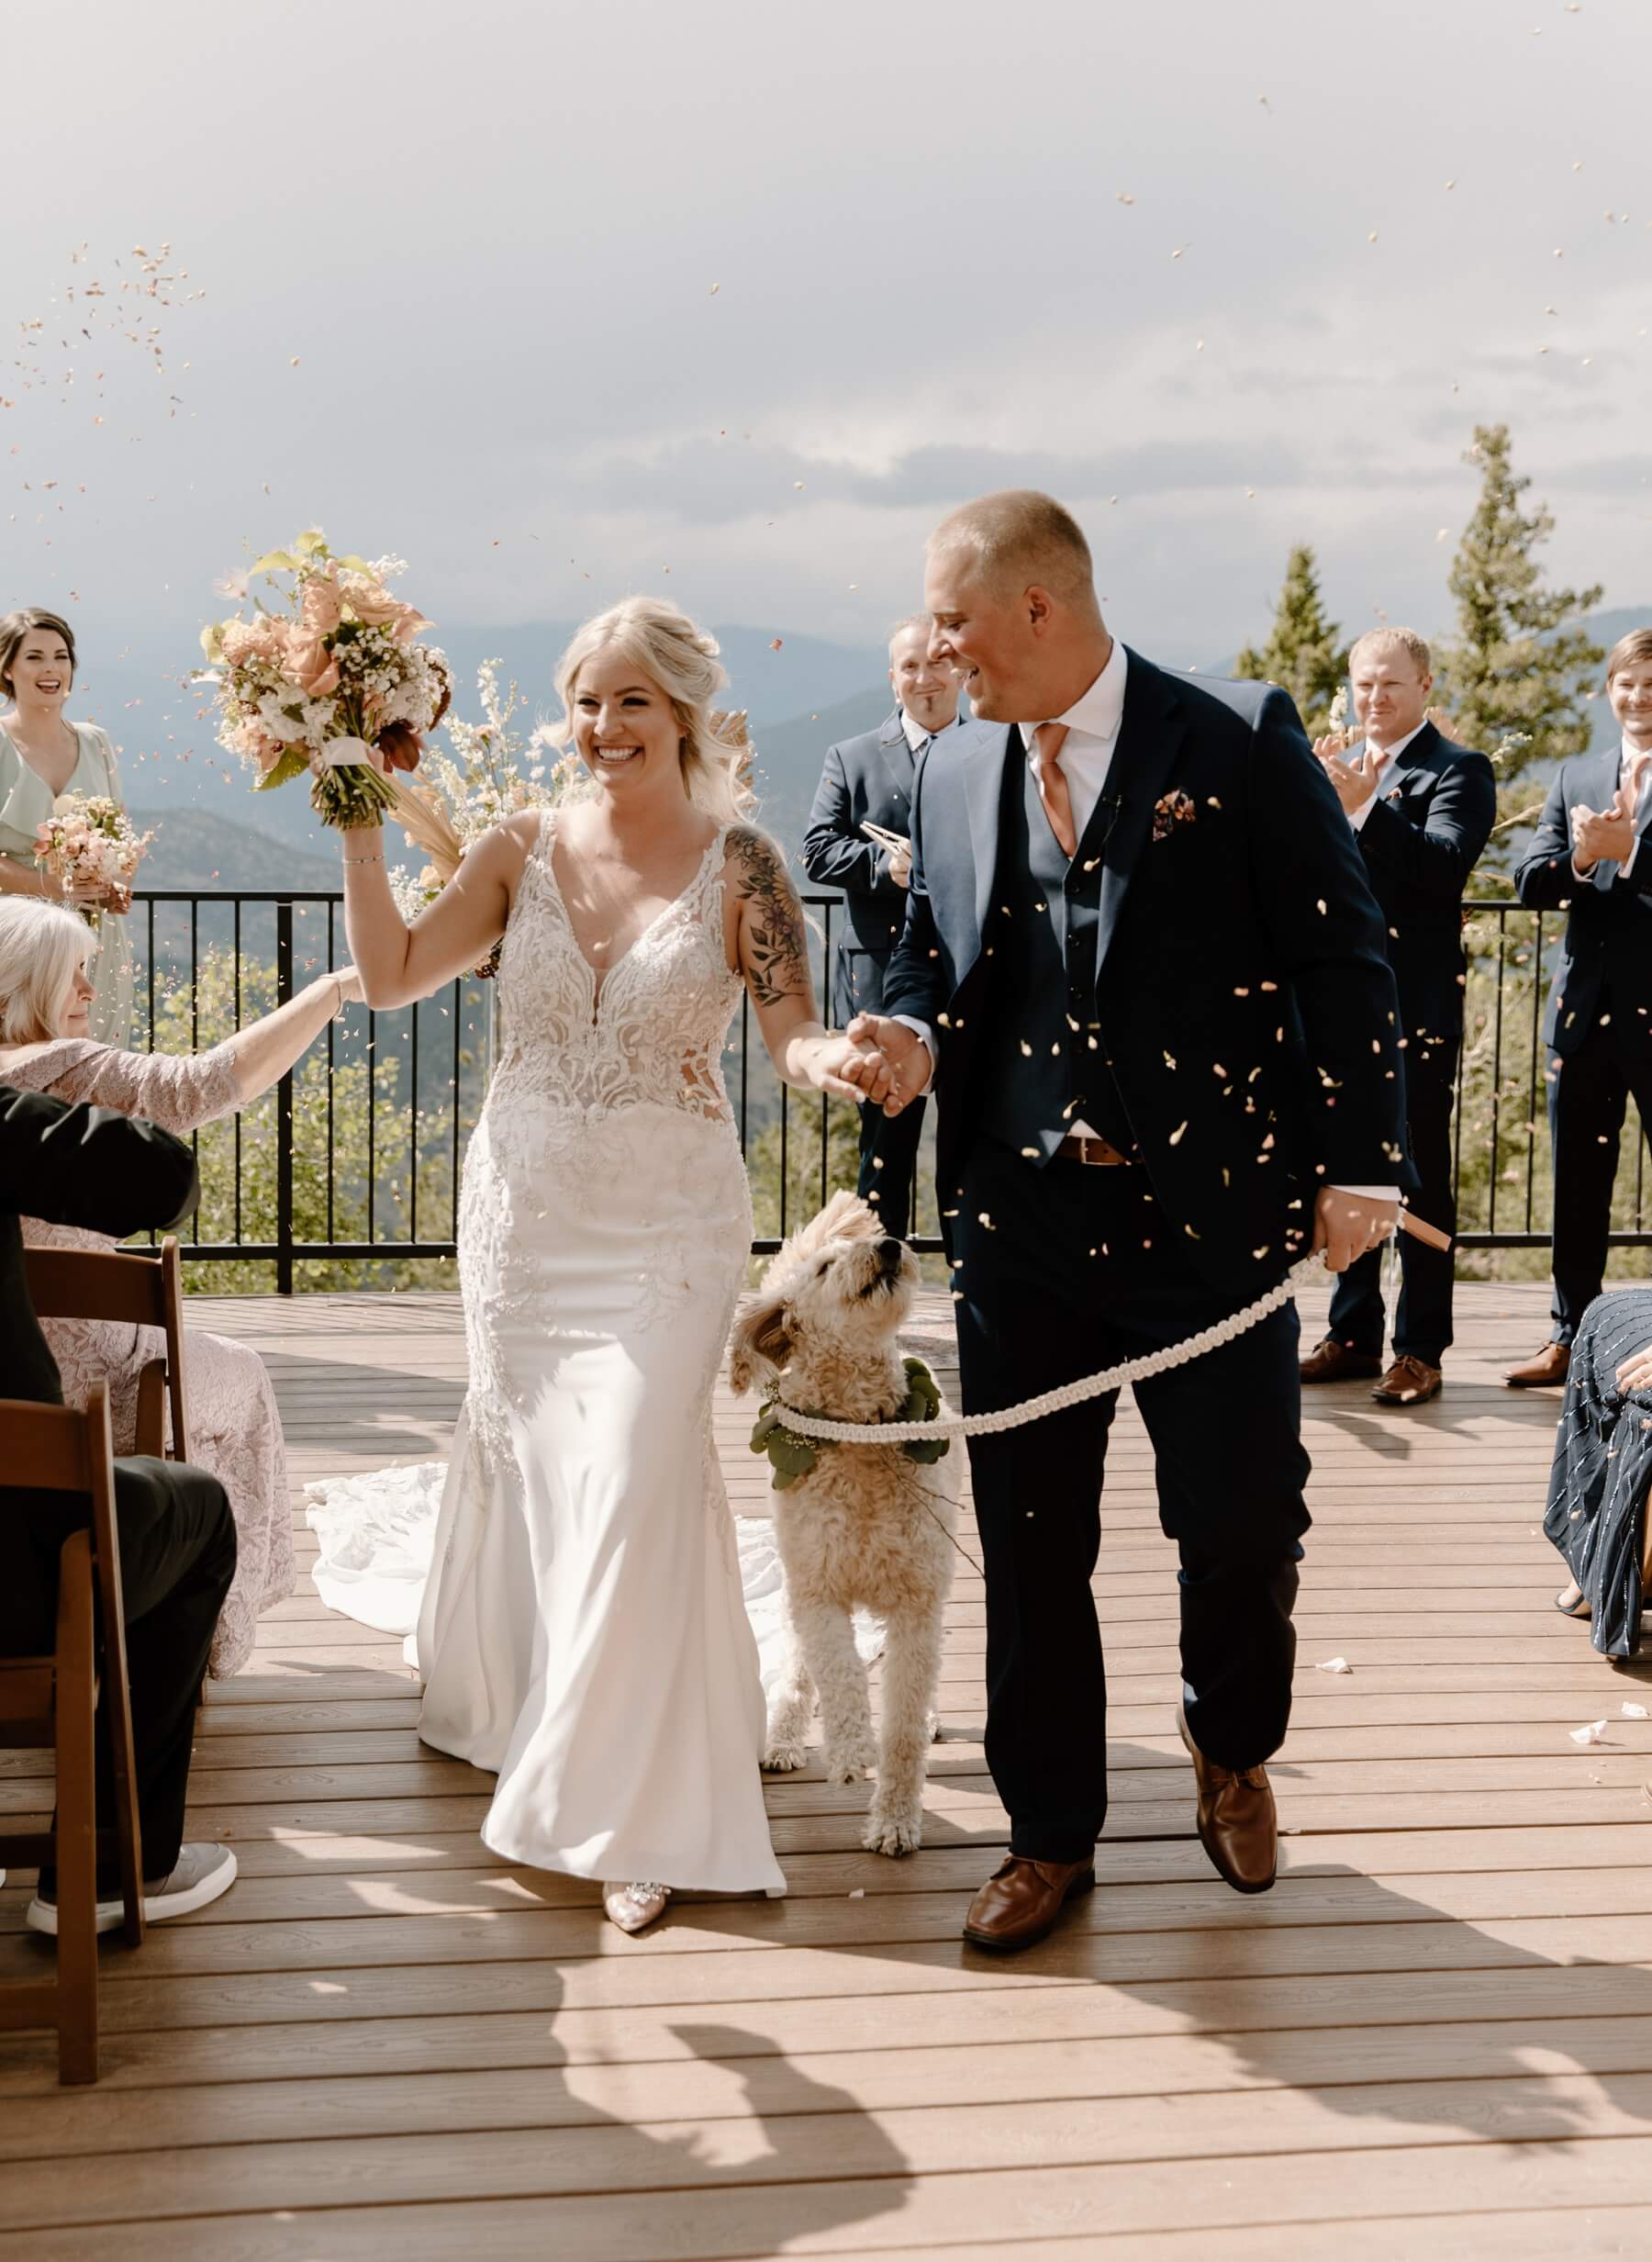 Bride and groom exiting ceremony with dog at Idaho Springs wedding venue | McArthur Weddings and Events